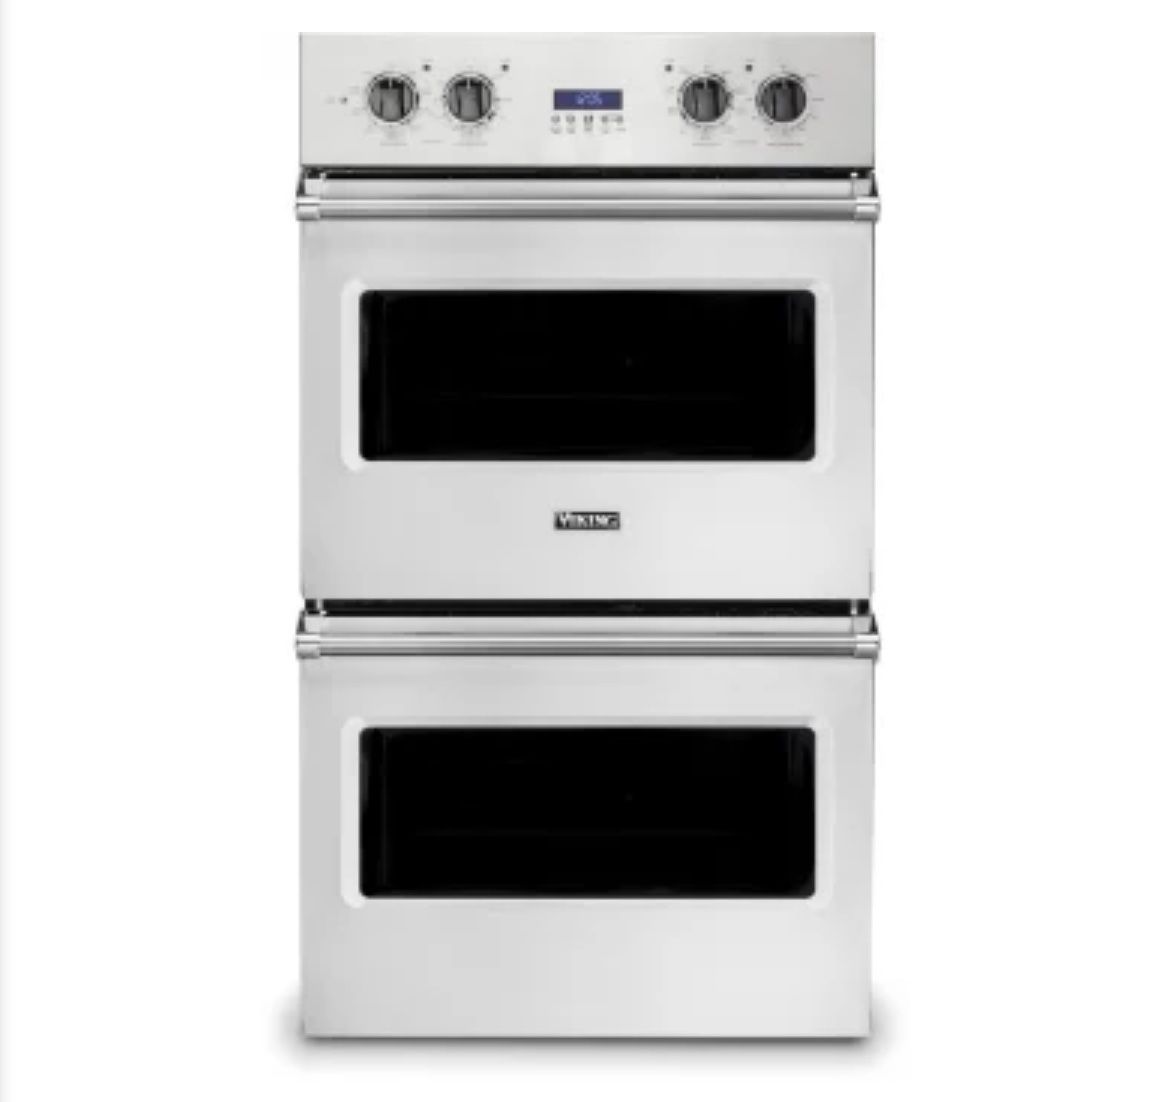  30 Inch Professional 5 Series Double Oven with 9.4 cu. ft. Total Capacity, 6 Oven Racks, Delay Bake, BlackChrome™ Knobs, Vari-Speed, Rapid Ready™, Tr